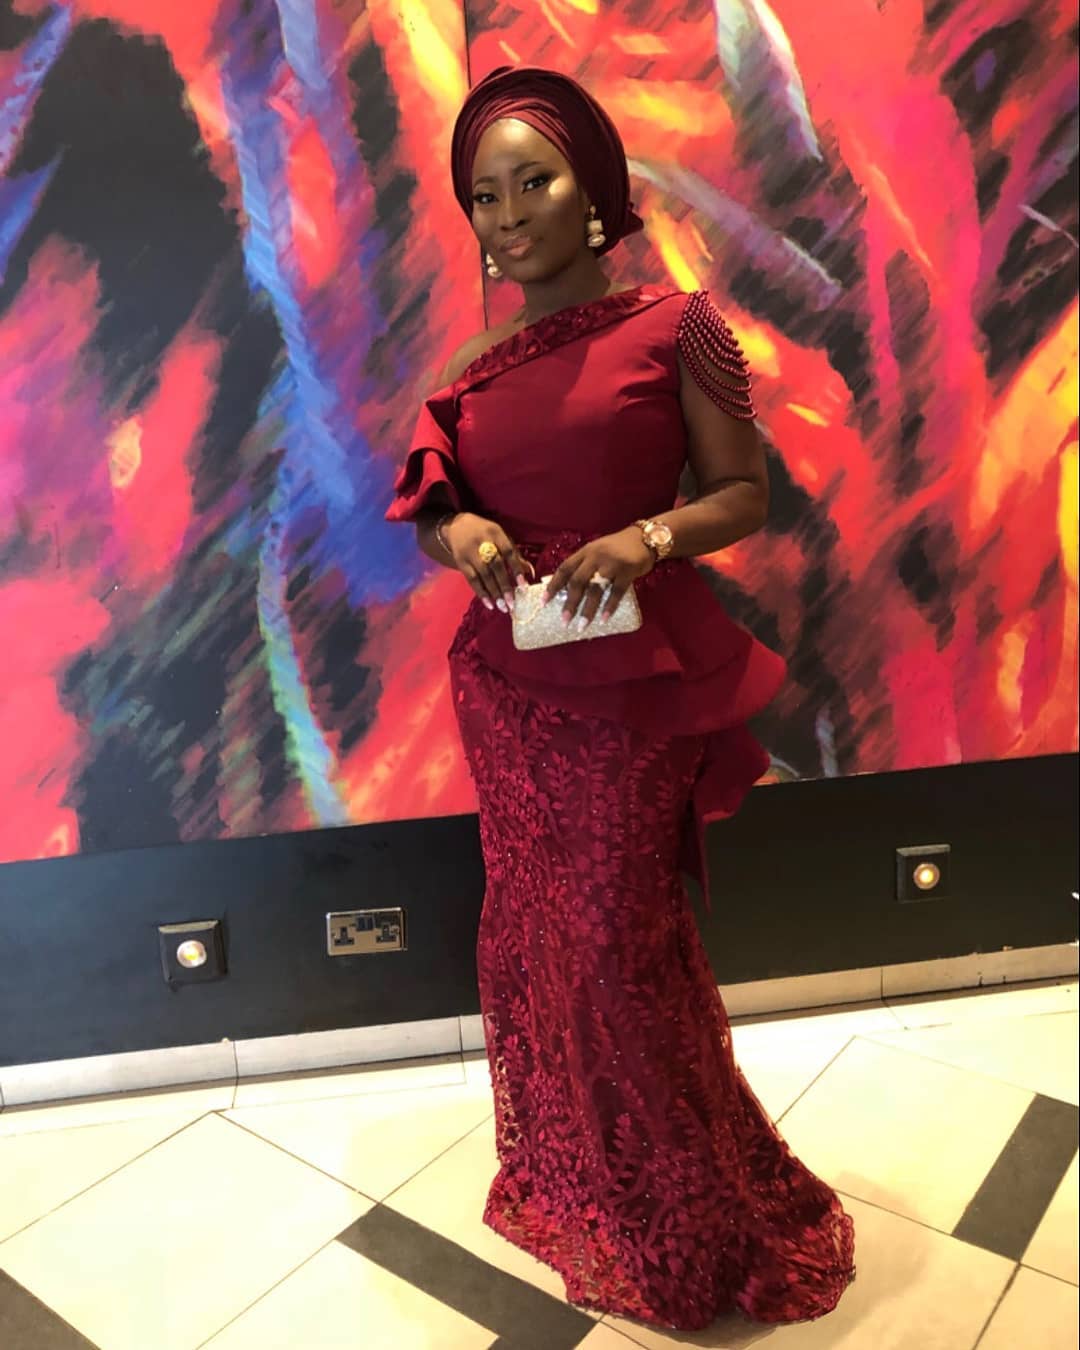 We Saw The Best Lace Asoebi Styles Off The Gram Over The Weekend